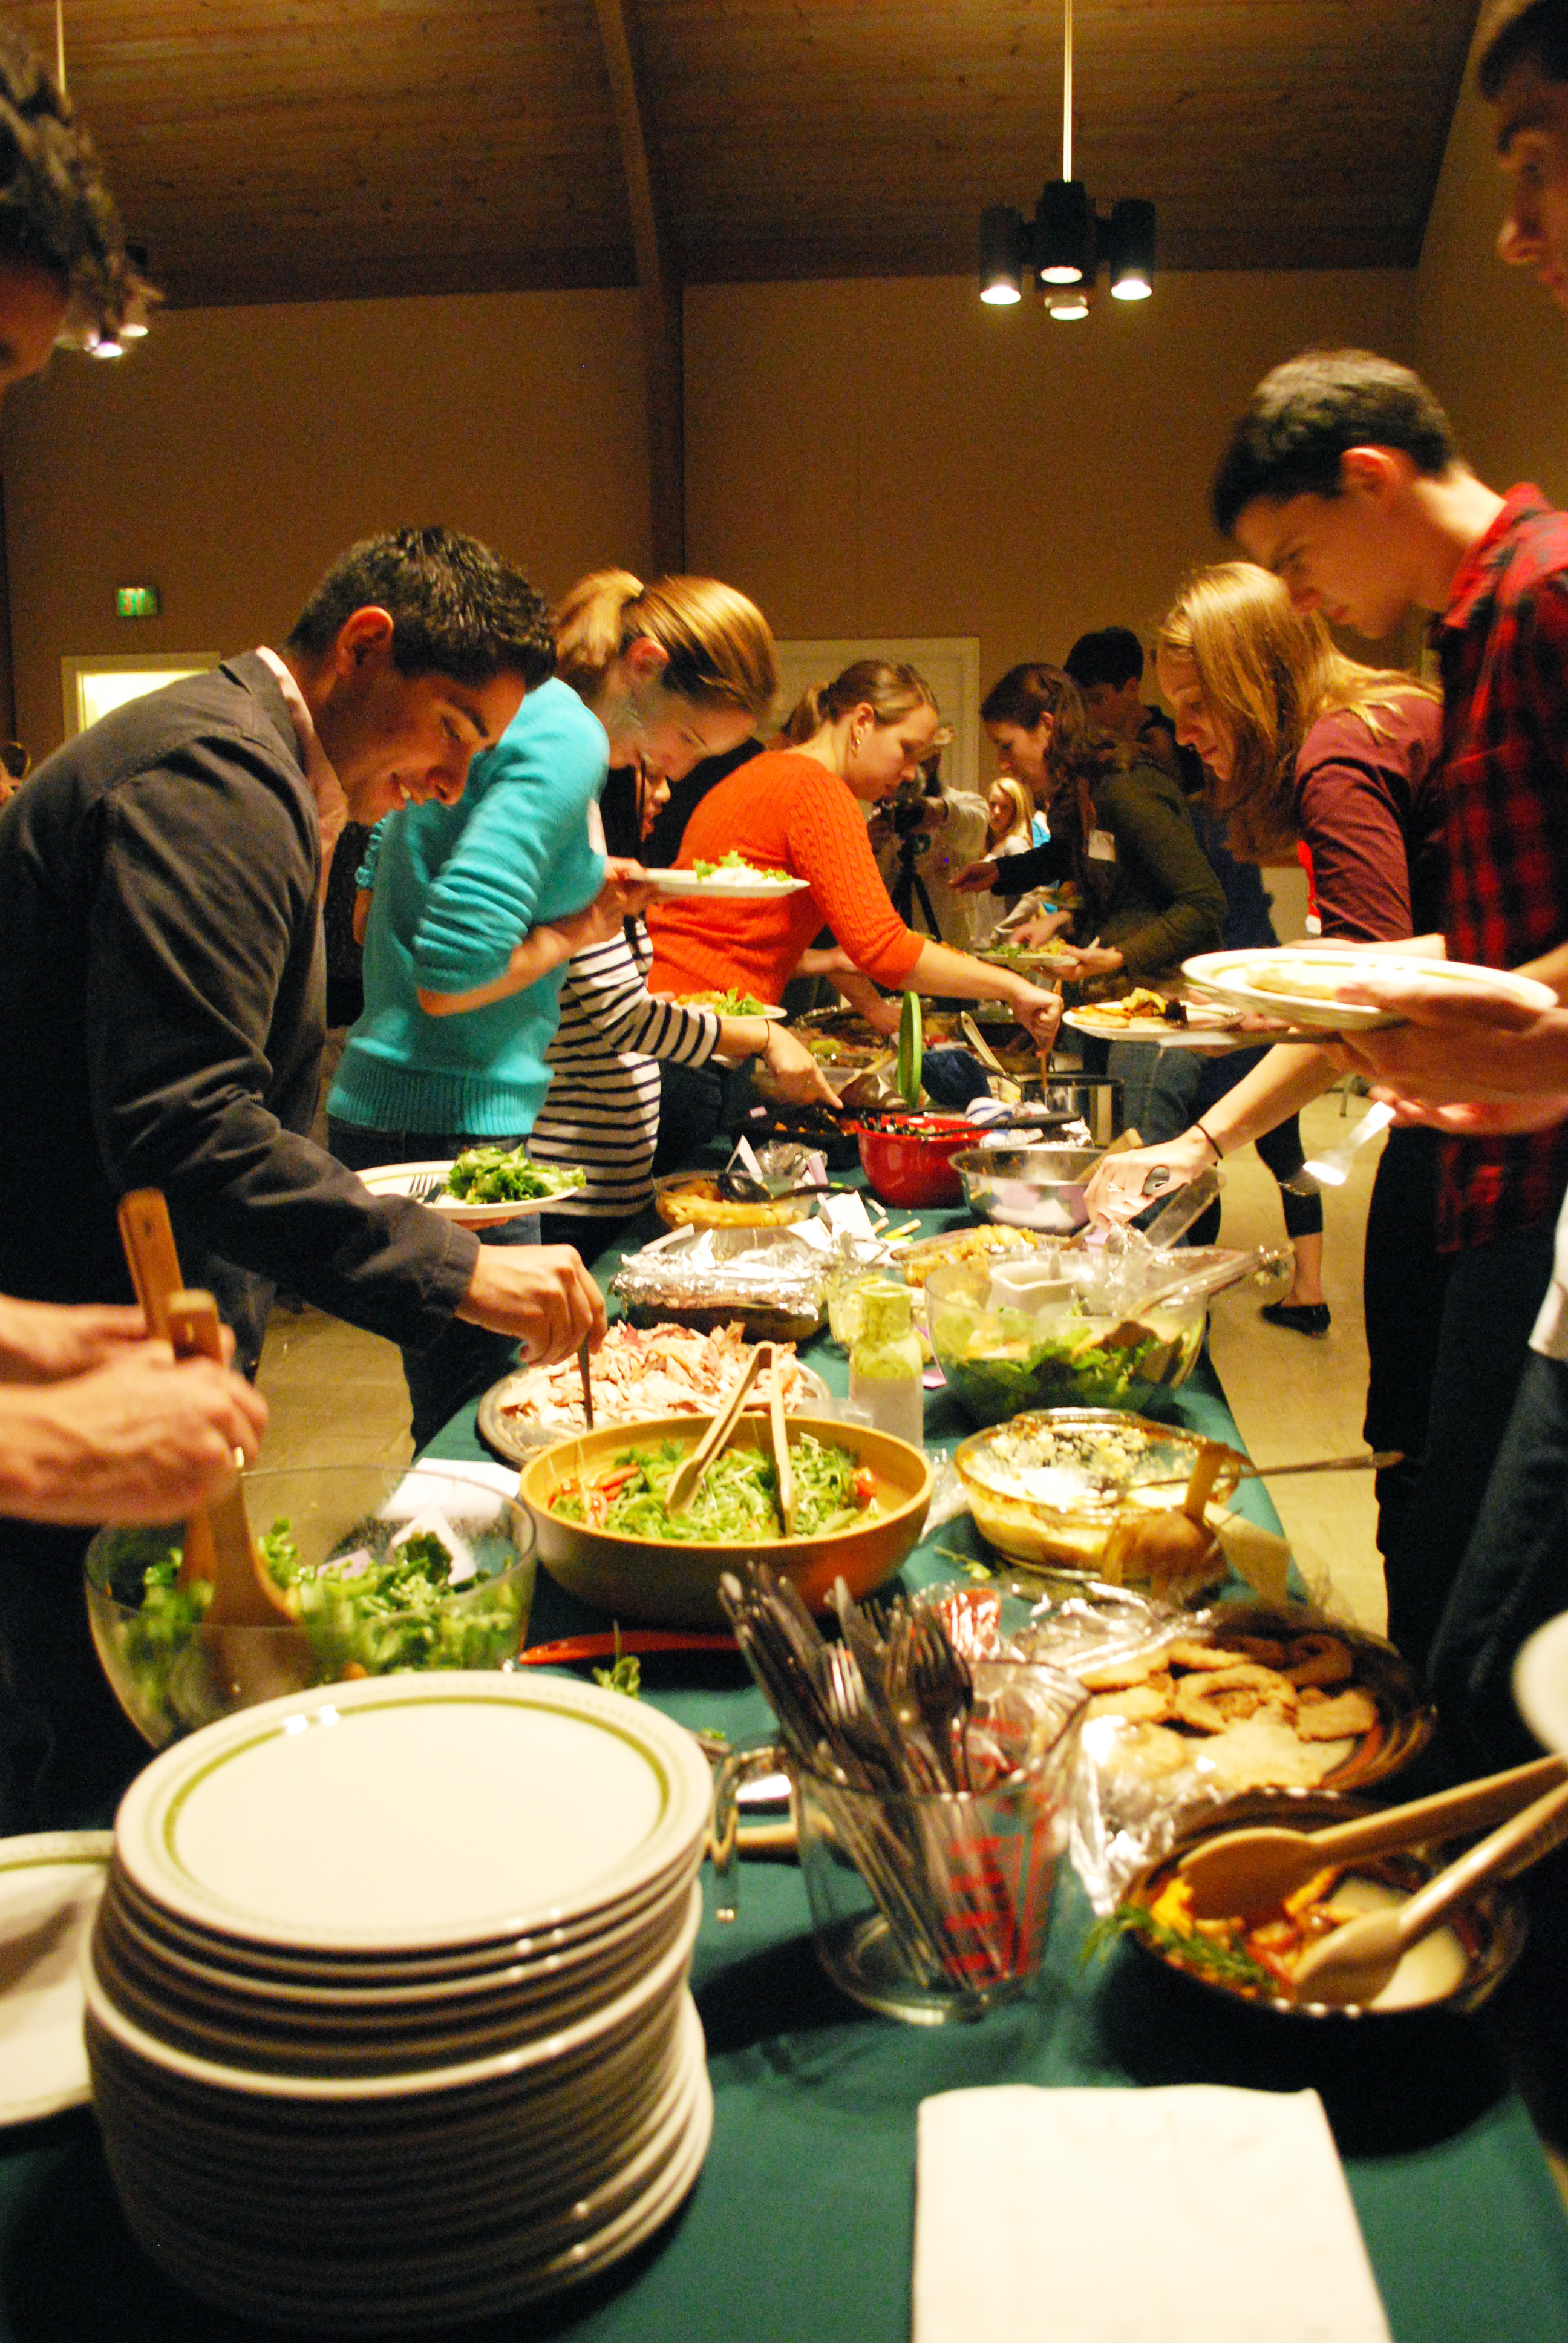 Group of people getting food from a buffet line